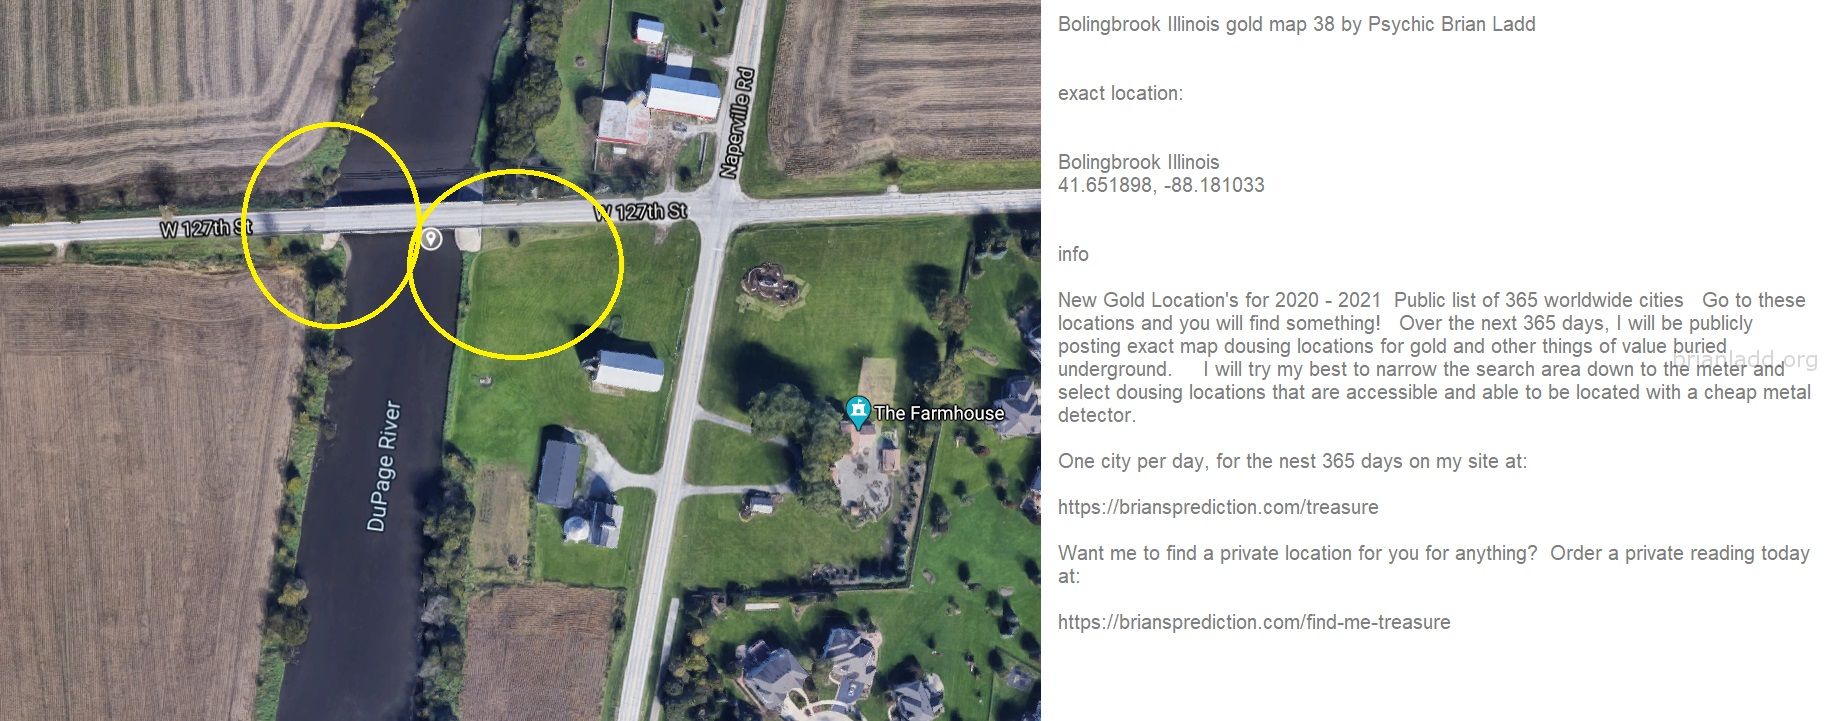 Bolingbrook Illinois Gold Map 38 By Psychic Brian Ladd - Bolingbrook Illinois Gold Map 38 By Psychic Brian Ladd  Exact L...
Bolingbrook Illinois Gold Map 38 By Psychic Brian Ladd  Exact Location:  Bolingbrook Illinois  41.651898, -88.181033  Info  New Gold Location'S For 2020 - 2021  Public List Of 365 Worldwide Cities  Go To These Locations And You Will Find Something!  Over The Next 365 Days, I Will Be Publicly Posting Exact Map Dousing Locations For Gold And Other Things Of Value Buried Underground.  I Will Try My Best To Narrow The Search Area Down To The Meter And Select Dousing Locations That Are Accessible And Able To Be Located With A Cheap Metal Detector.  One City Per Day, For The Nest 365 Days On My Site At:   https://briansprediction.com/Treasure  Want Me To Find A Private Location For You For Anything?  Order A Private Reading Today At:   https://briansprediction.com/Find-Me-Treasure
